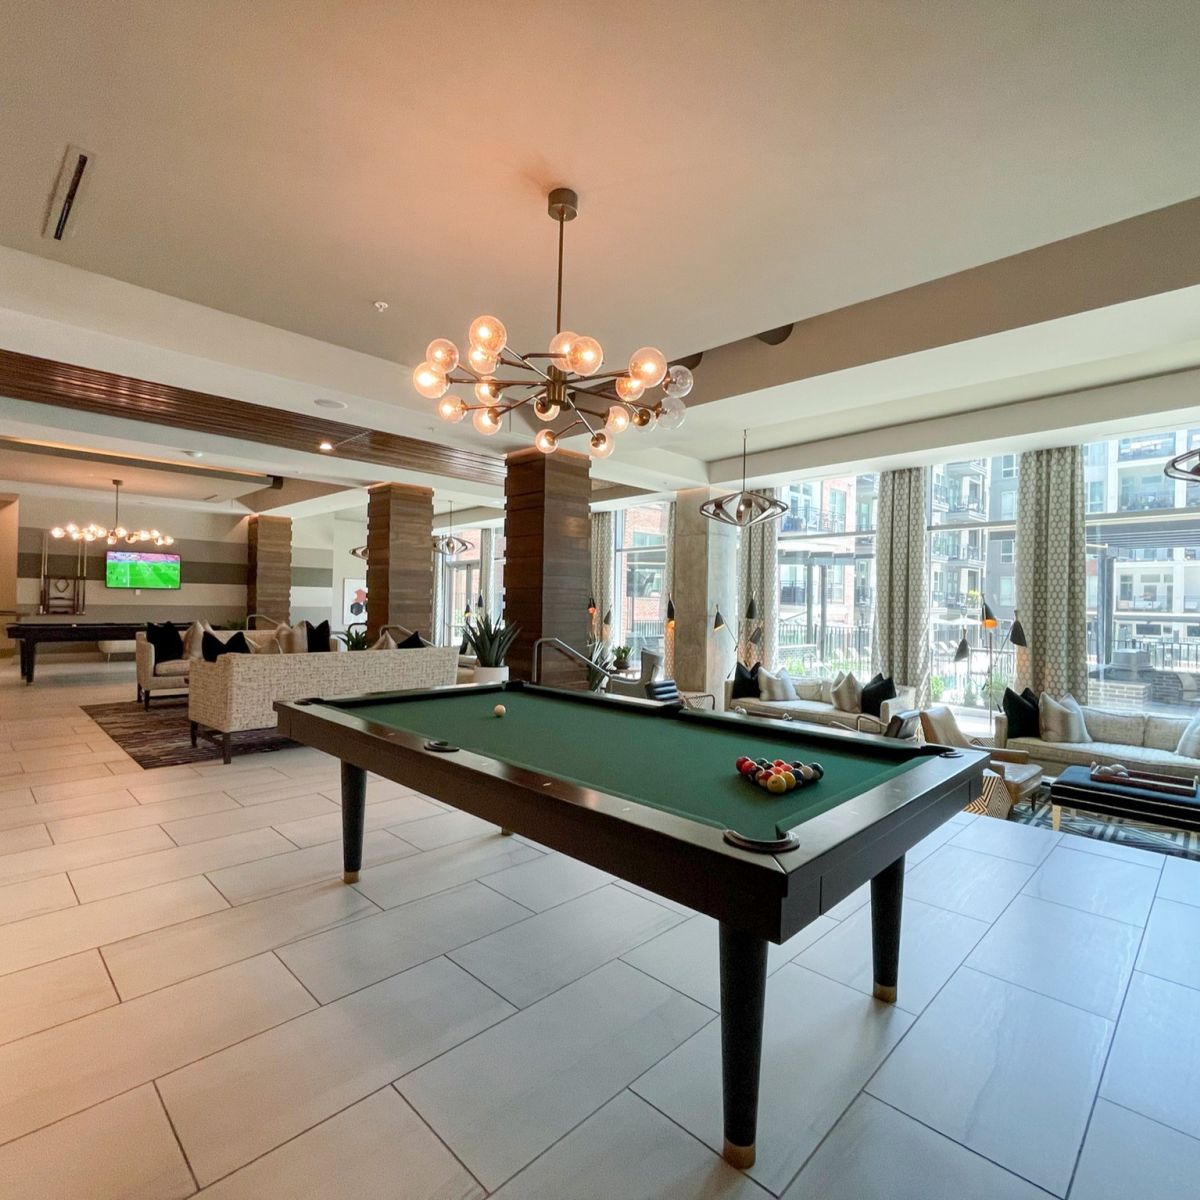 Van Alen apartments resident community lounge with billiards tables and courtyard views